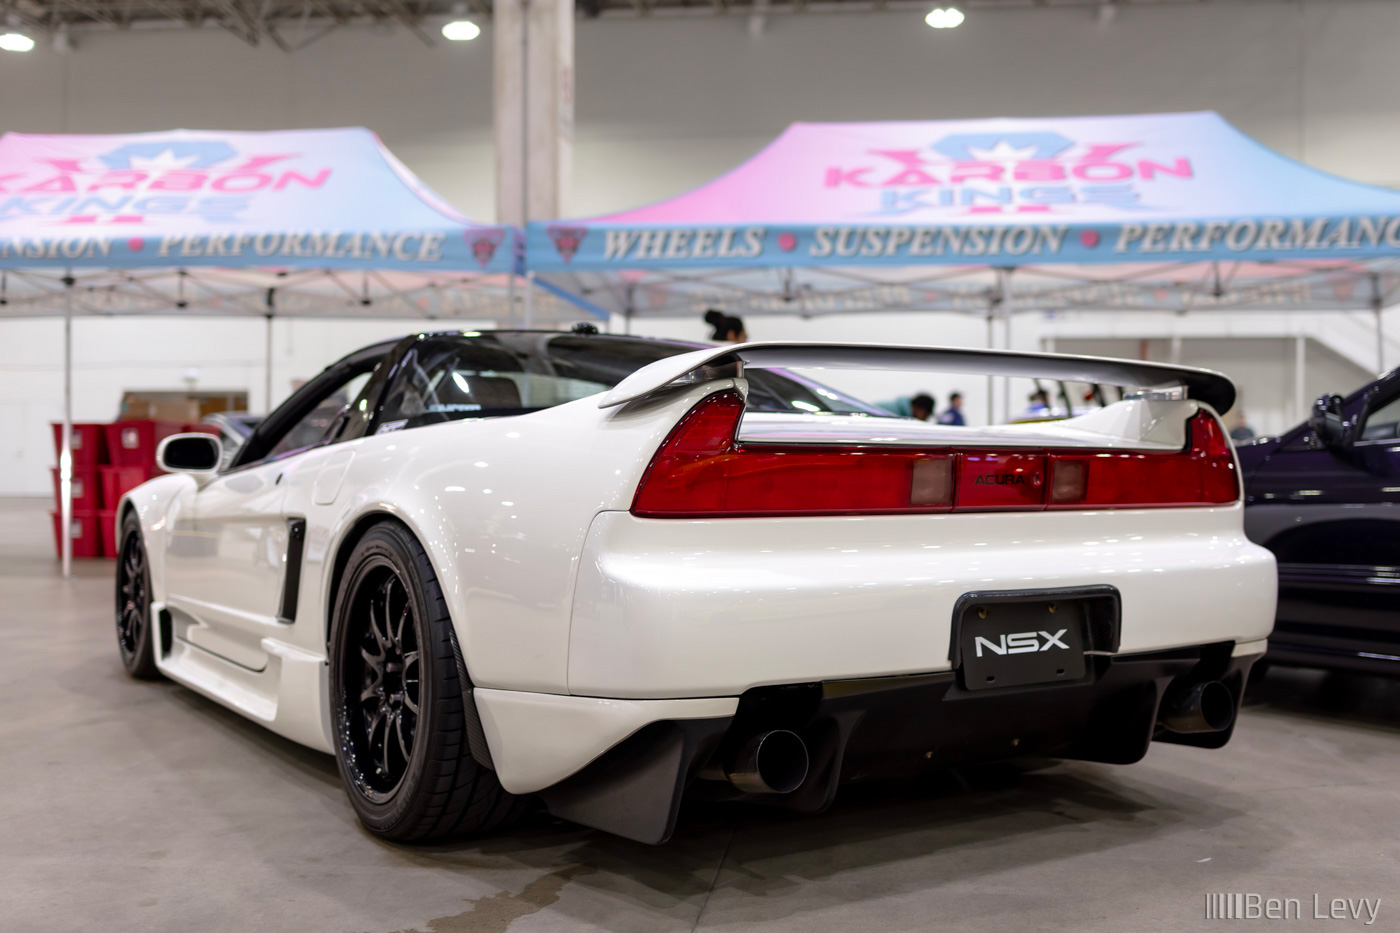 Rear Diffuser on Clean Acura NSX in White